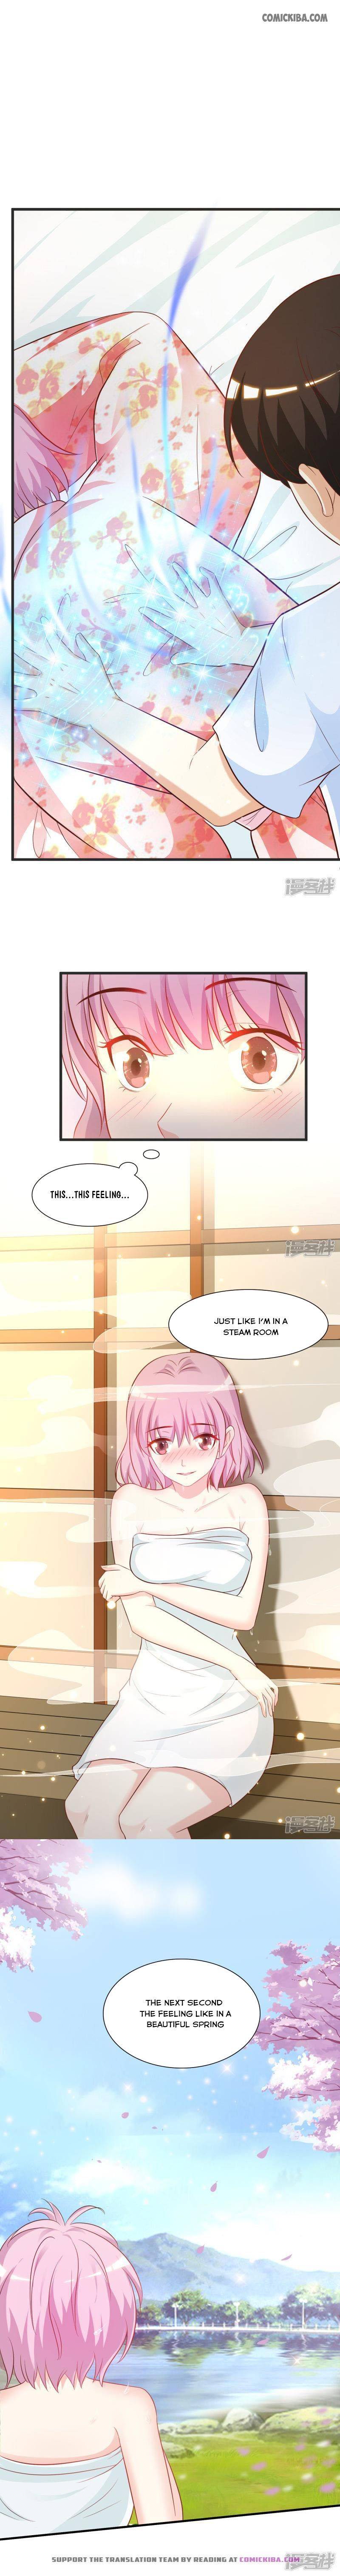 The Strongest Peach Blossom - Page 2